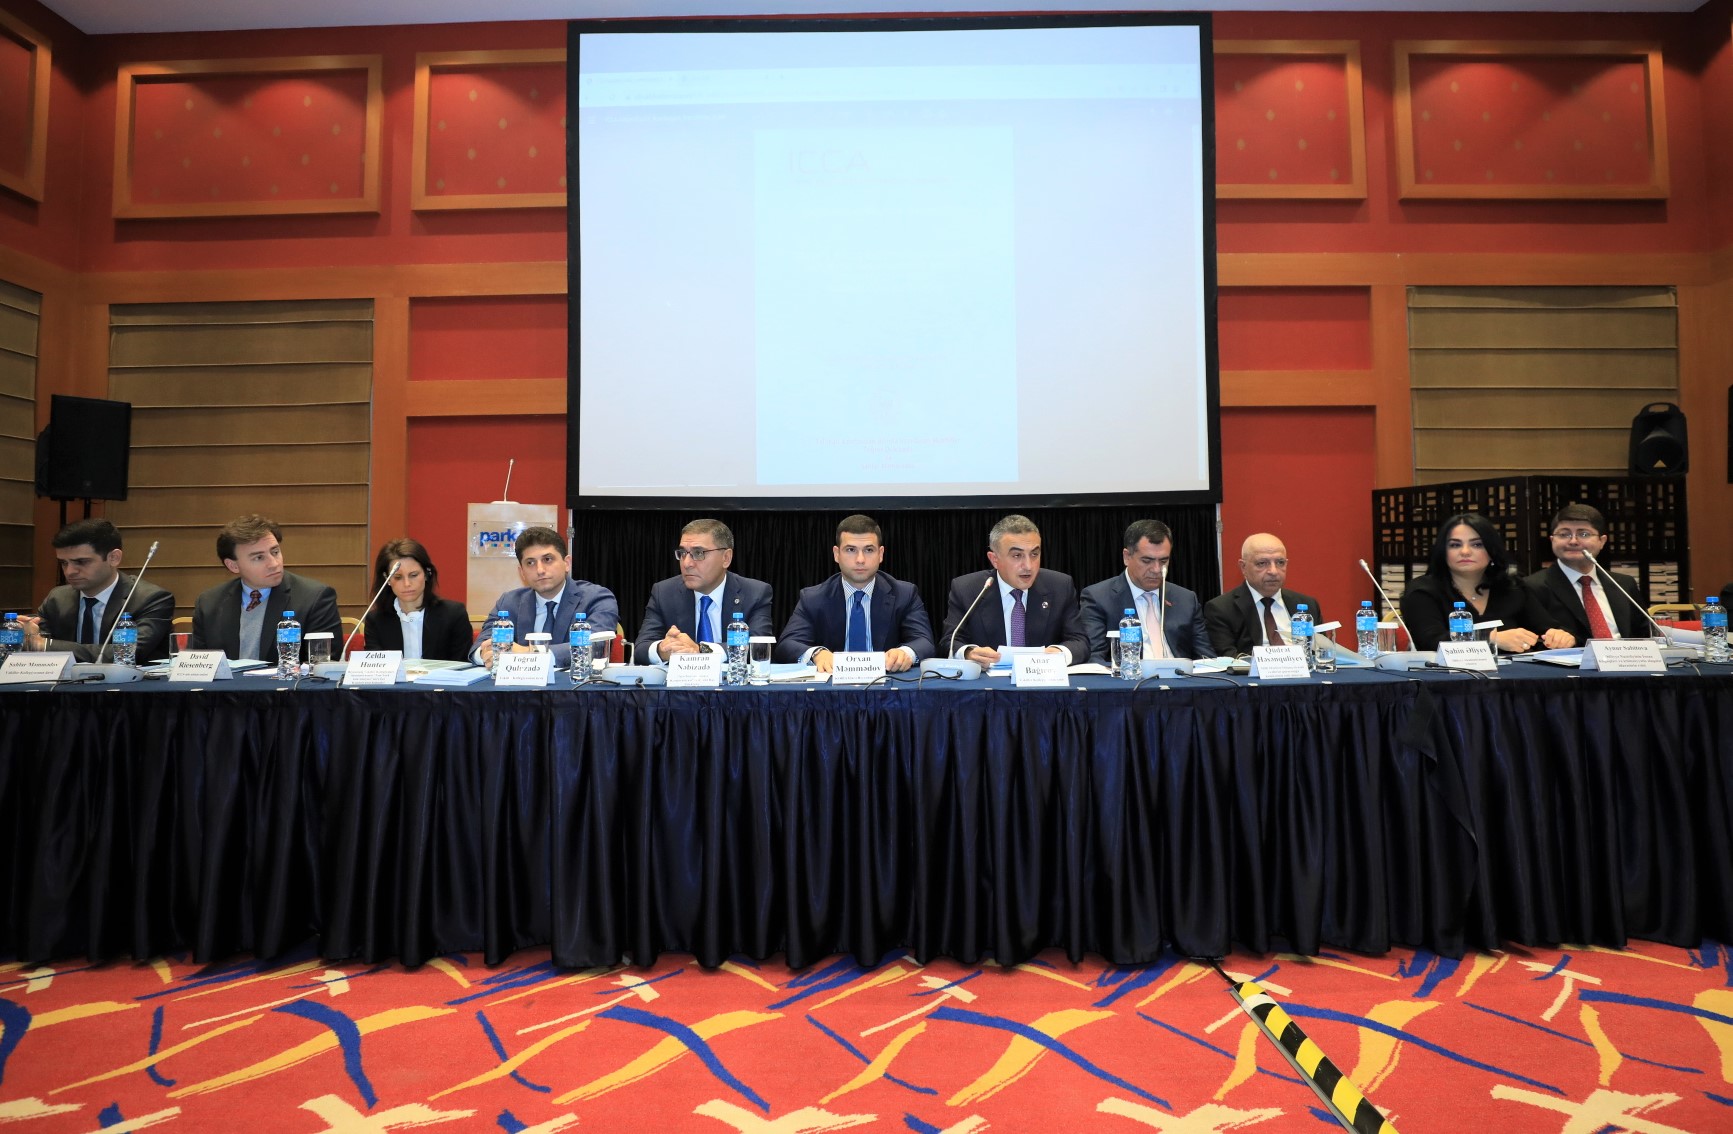 The role of arbitration as an alternative resolution of business disputes was discussed 